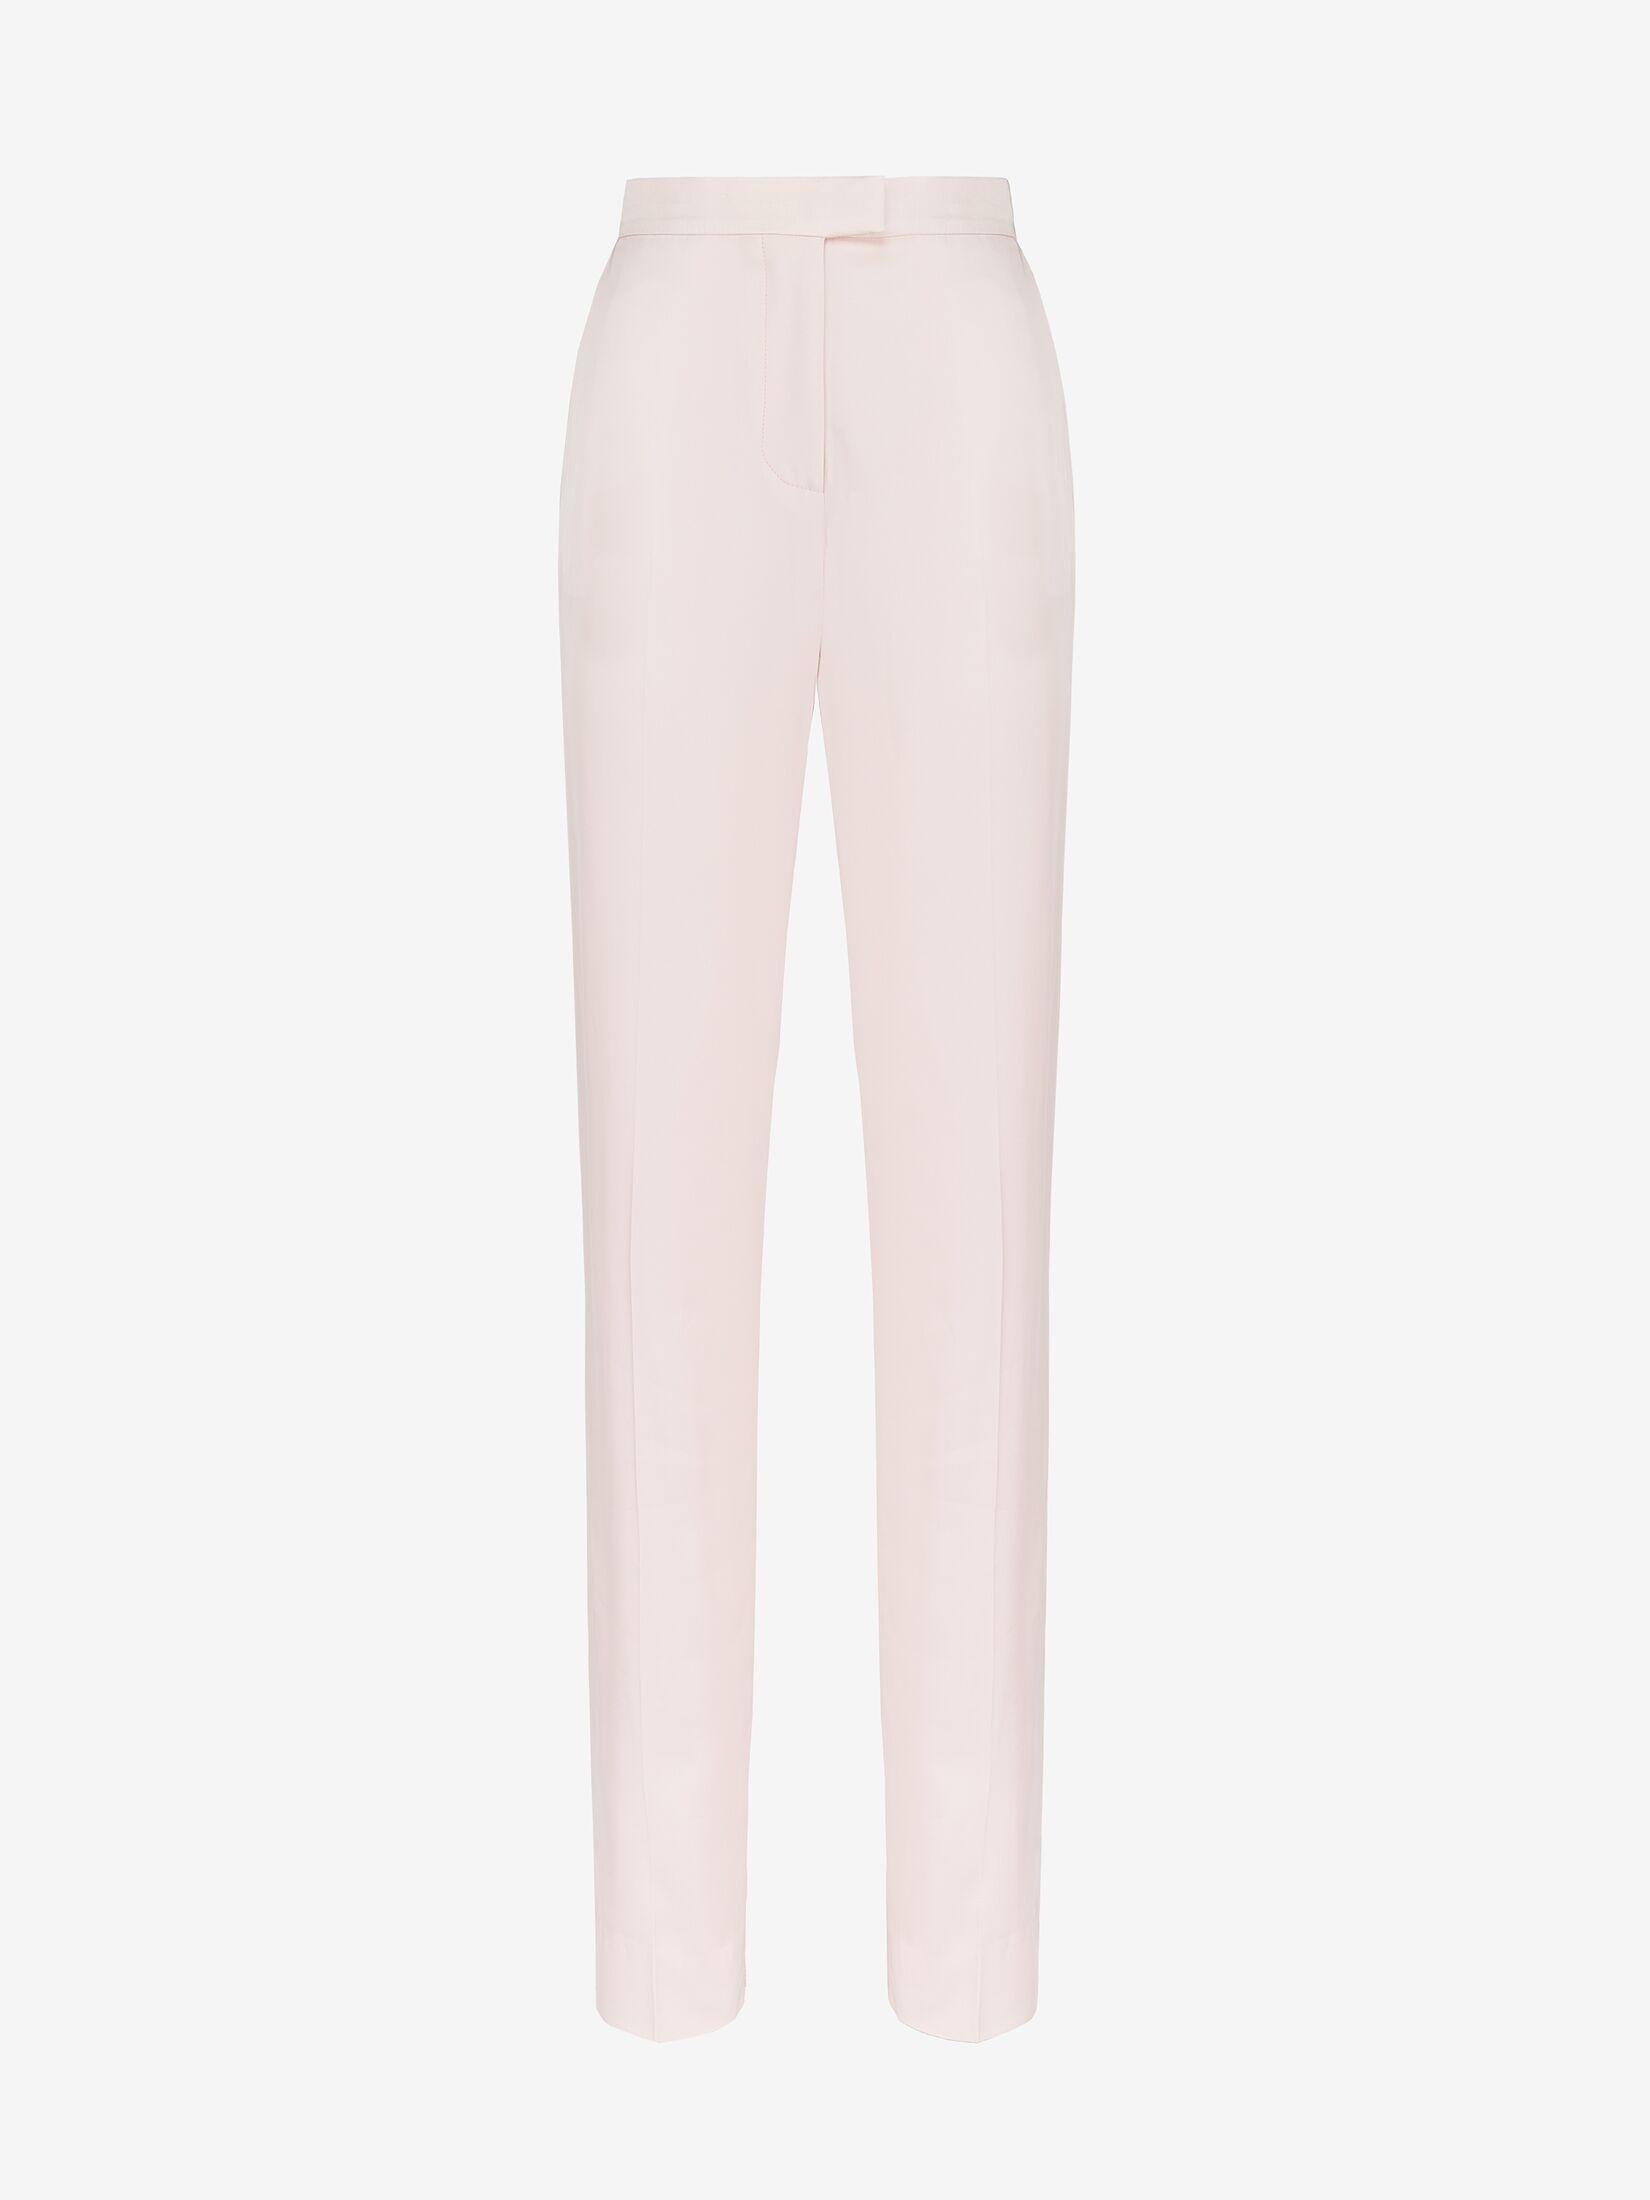 High-waisted Cigarette Trousers by ALEXANDER MCQUEEN